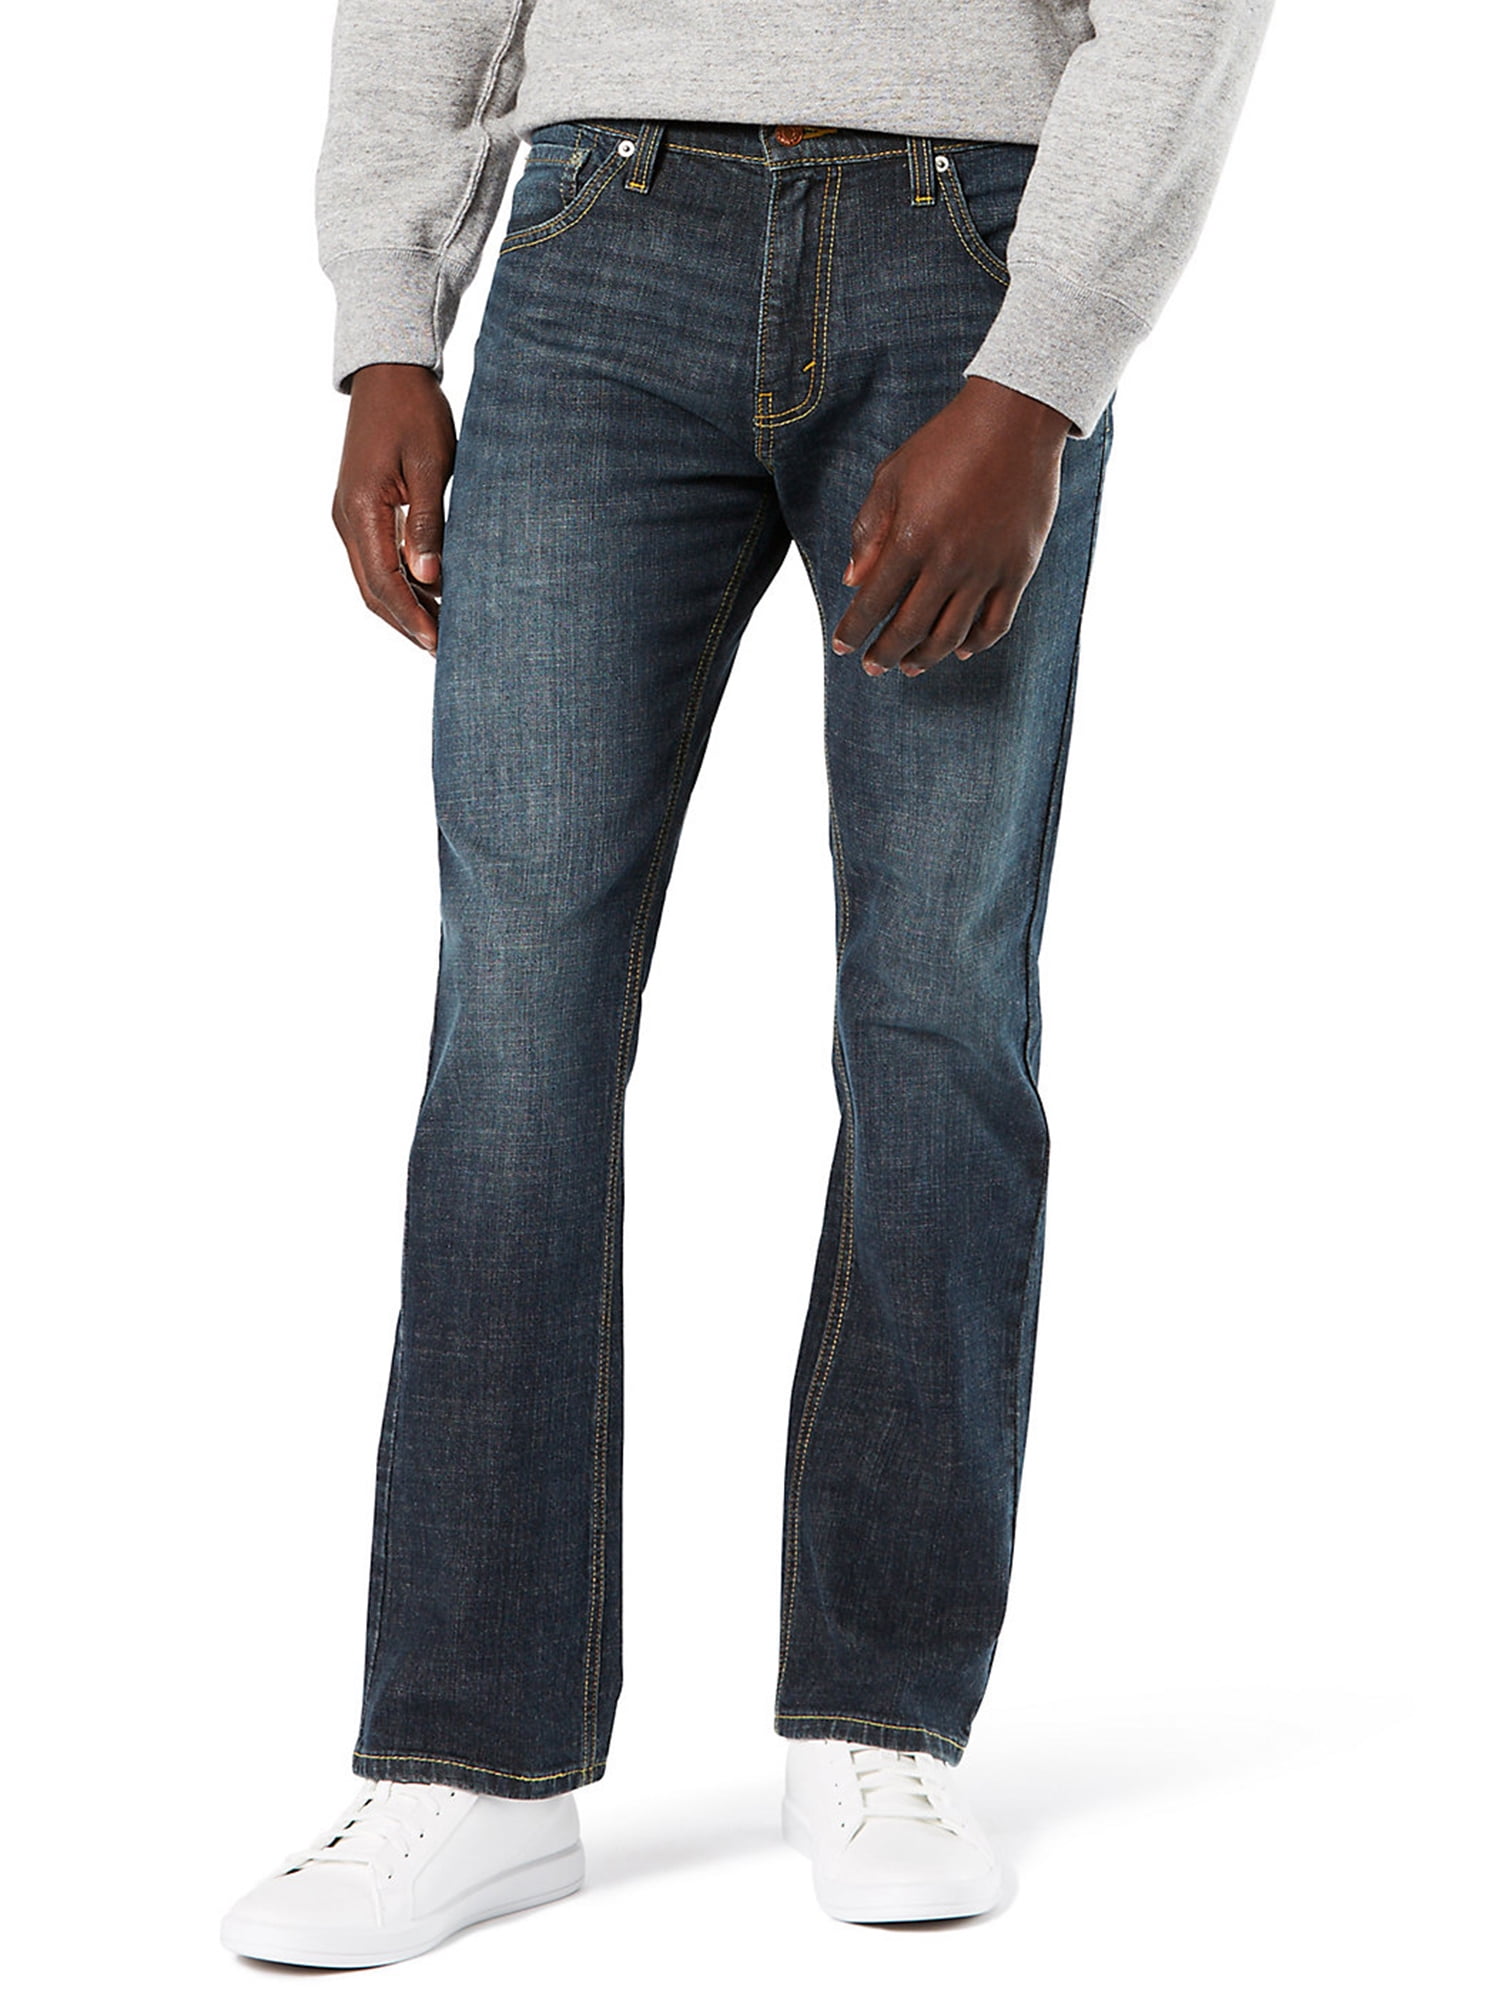 Aggregate 228+ boot cut jeans for man latest